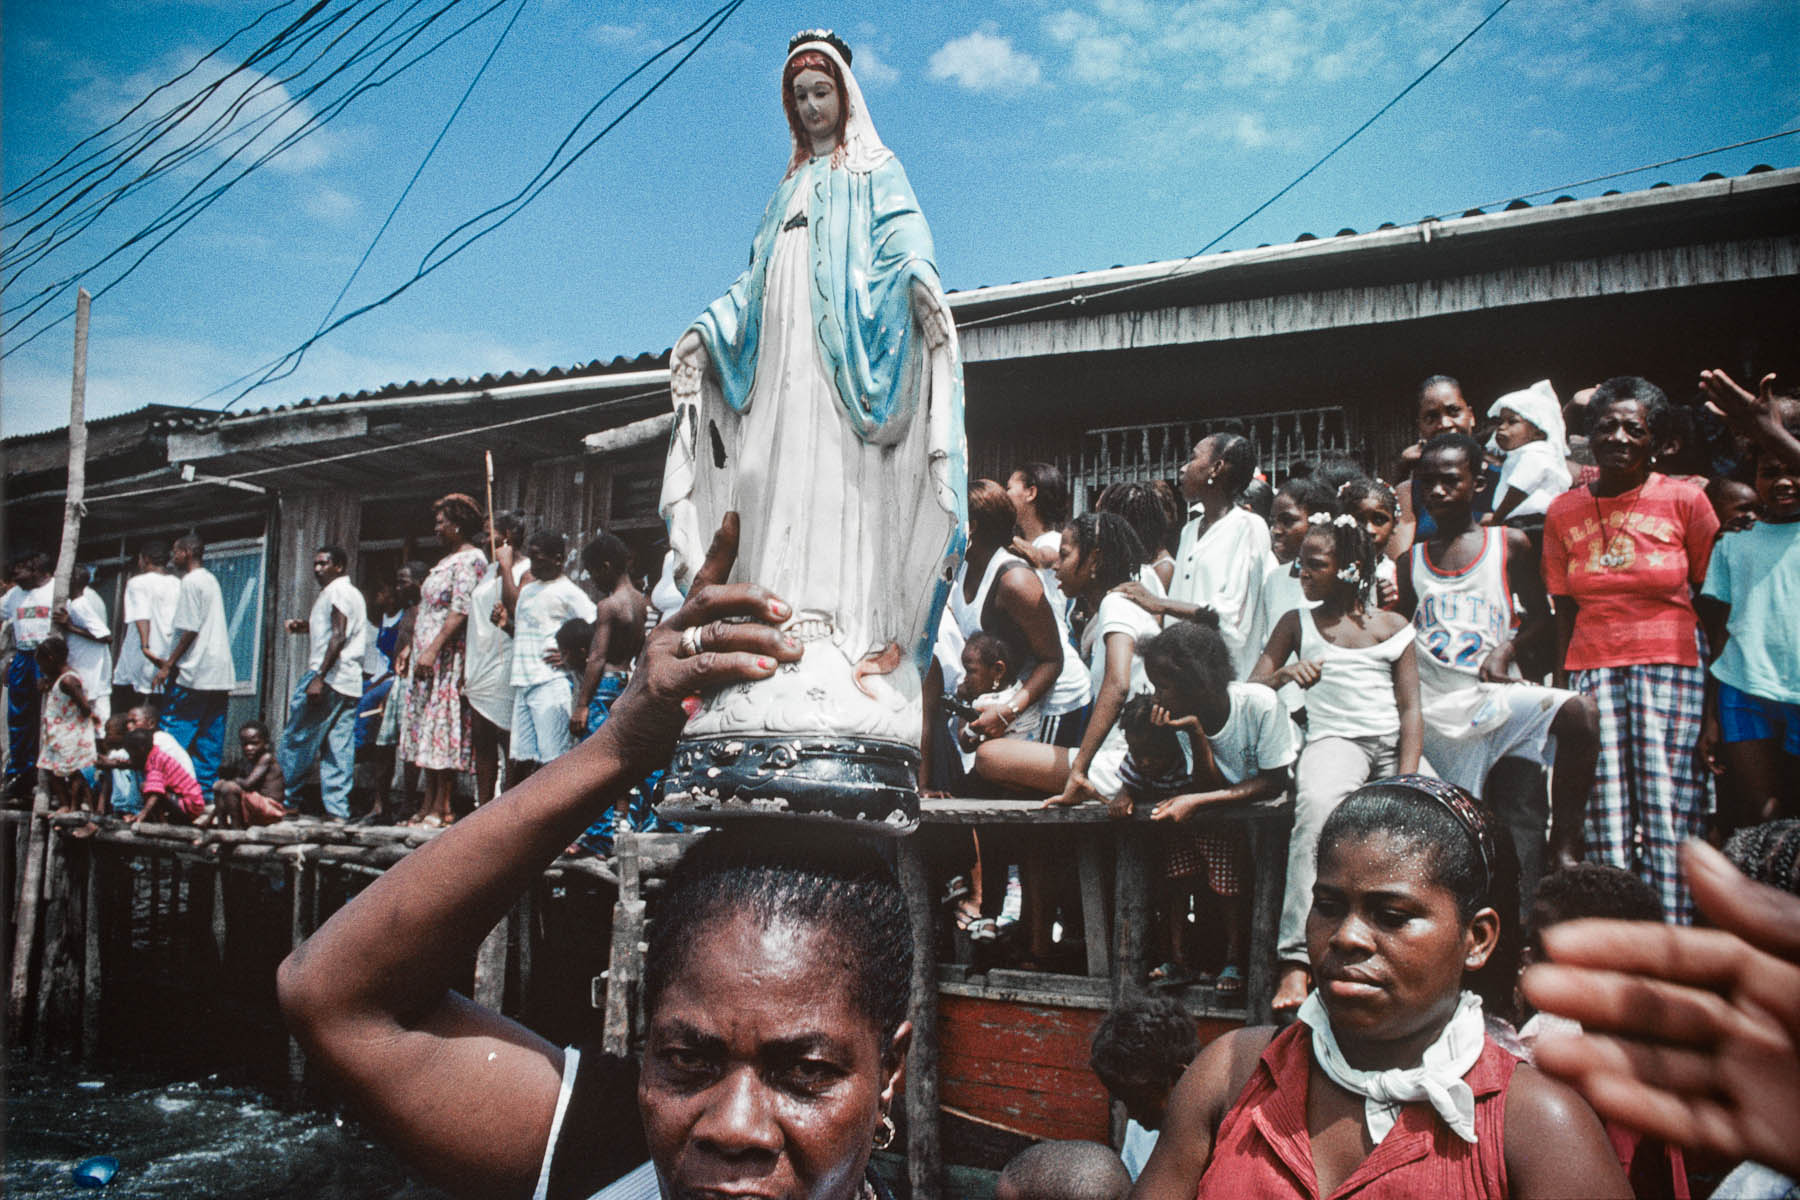 Celebration of the Day of Our Lady of Mount Carmel in July 1998